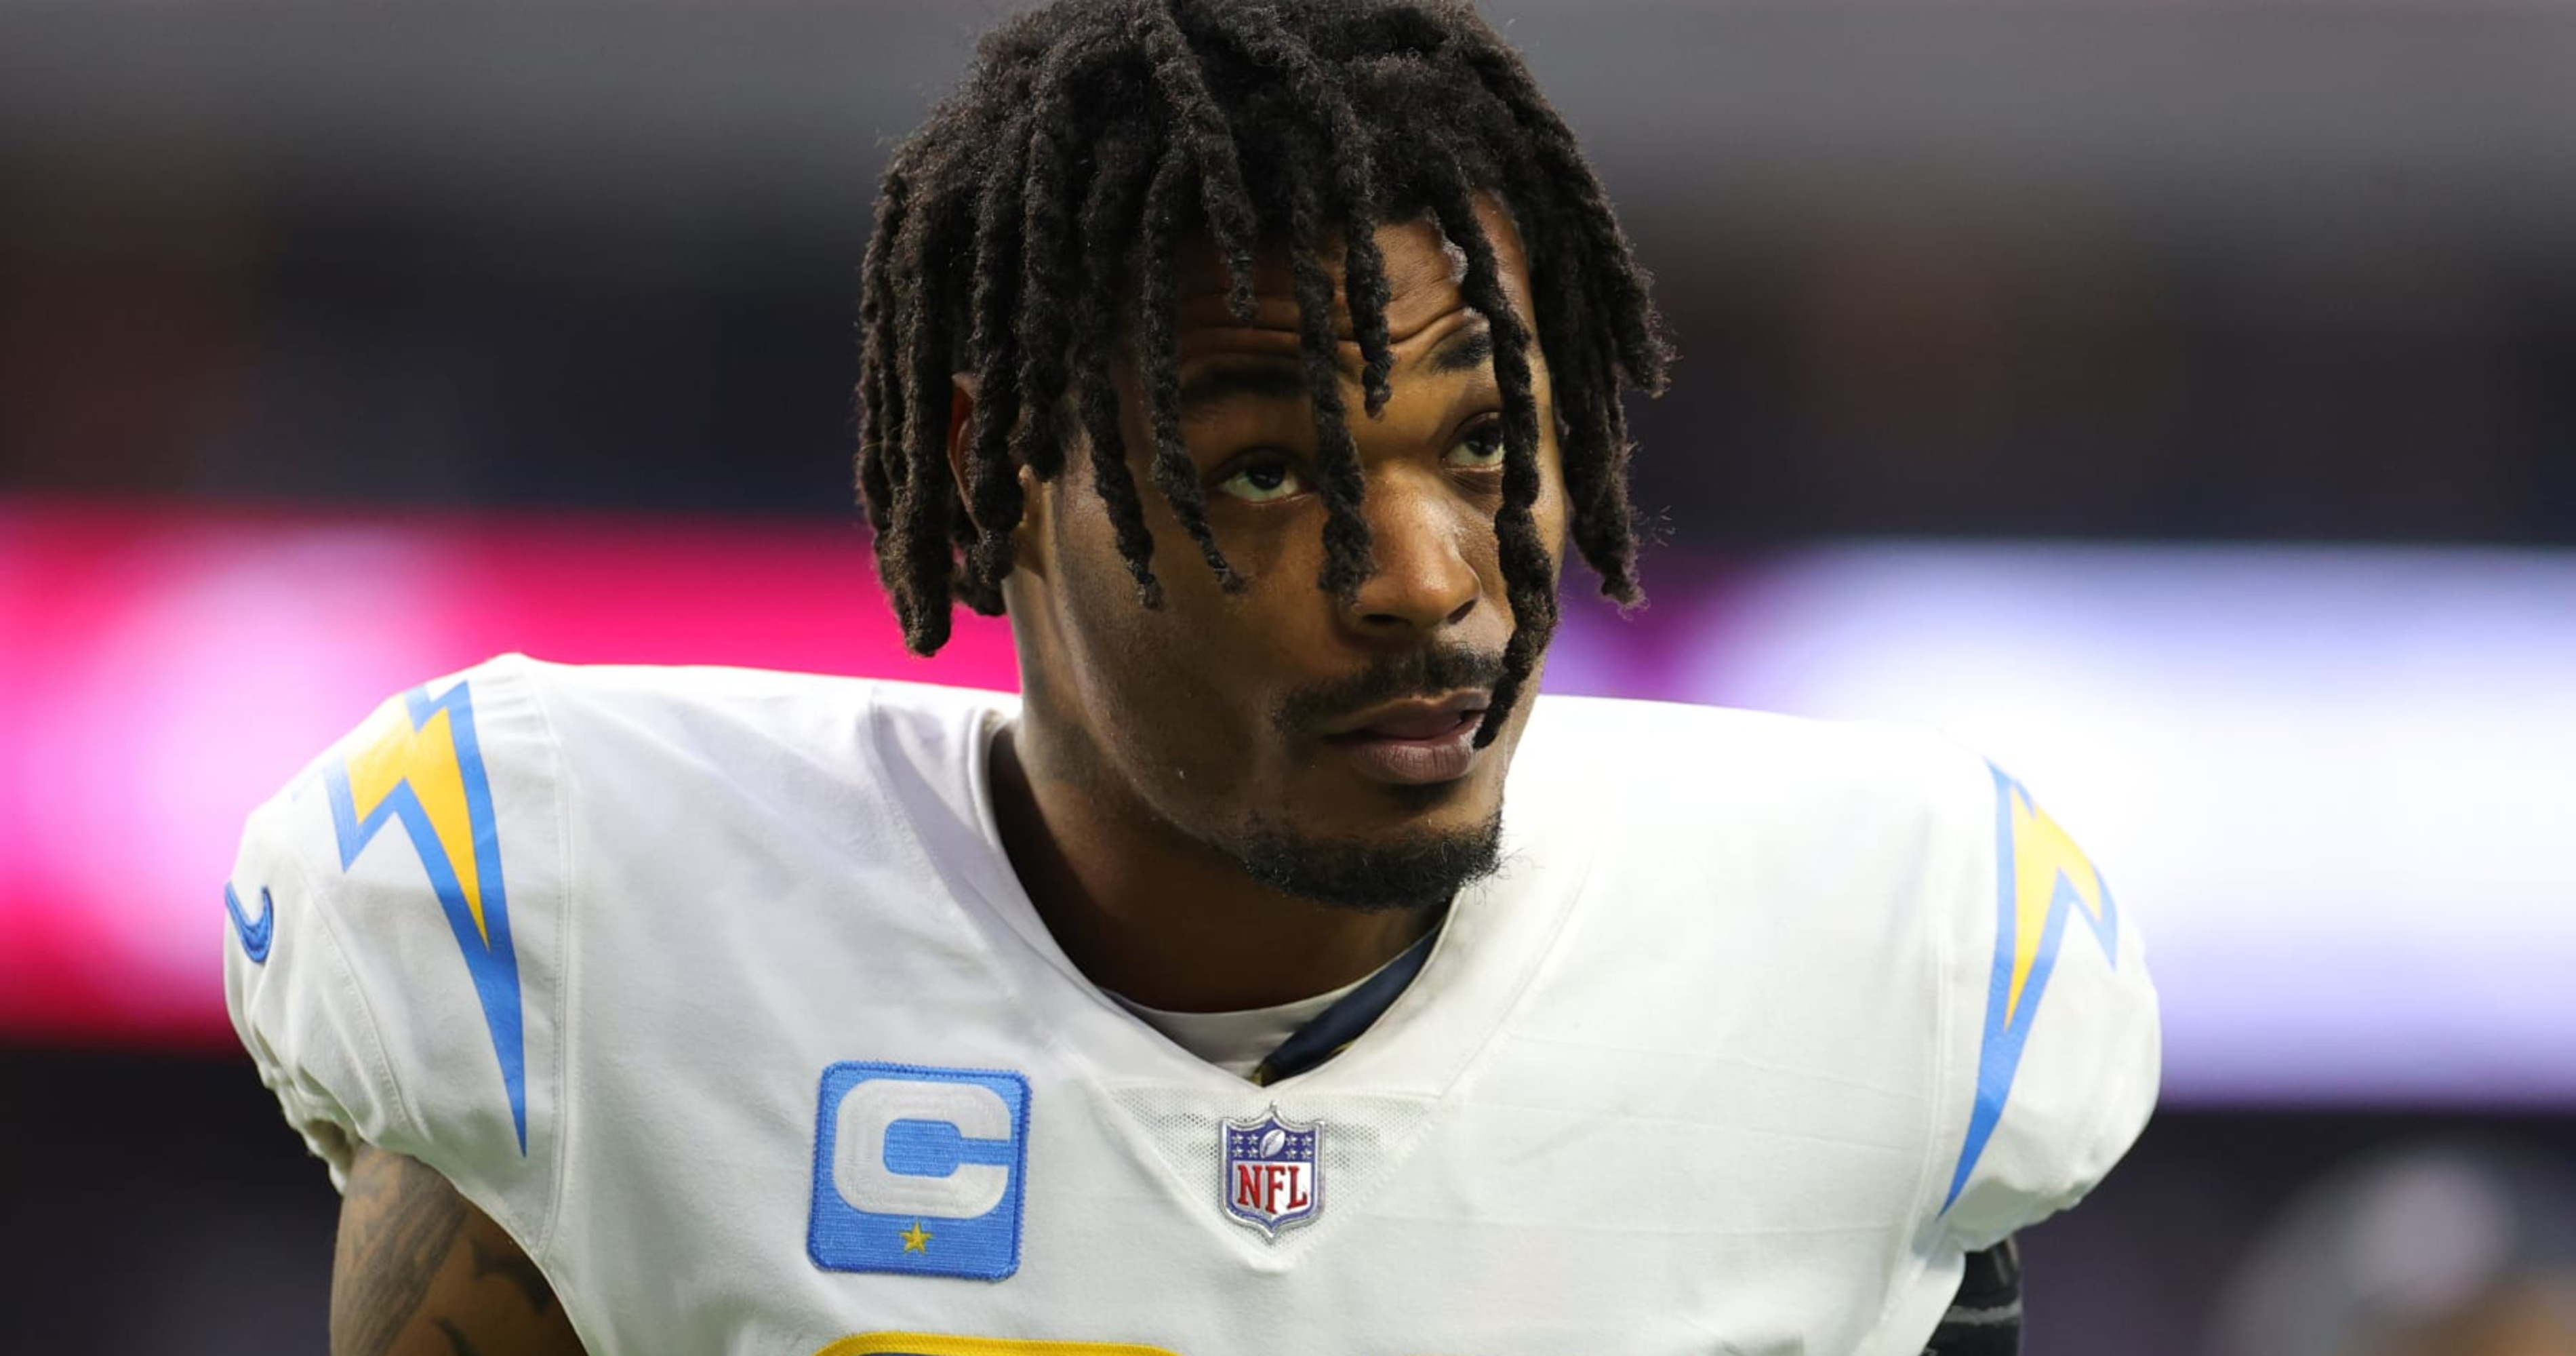 Chargers' Derwin James Jr. Calls on His Family to Protest His